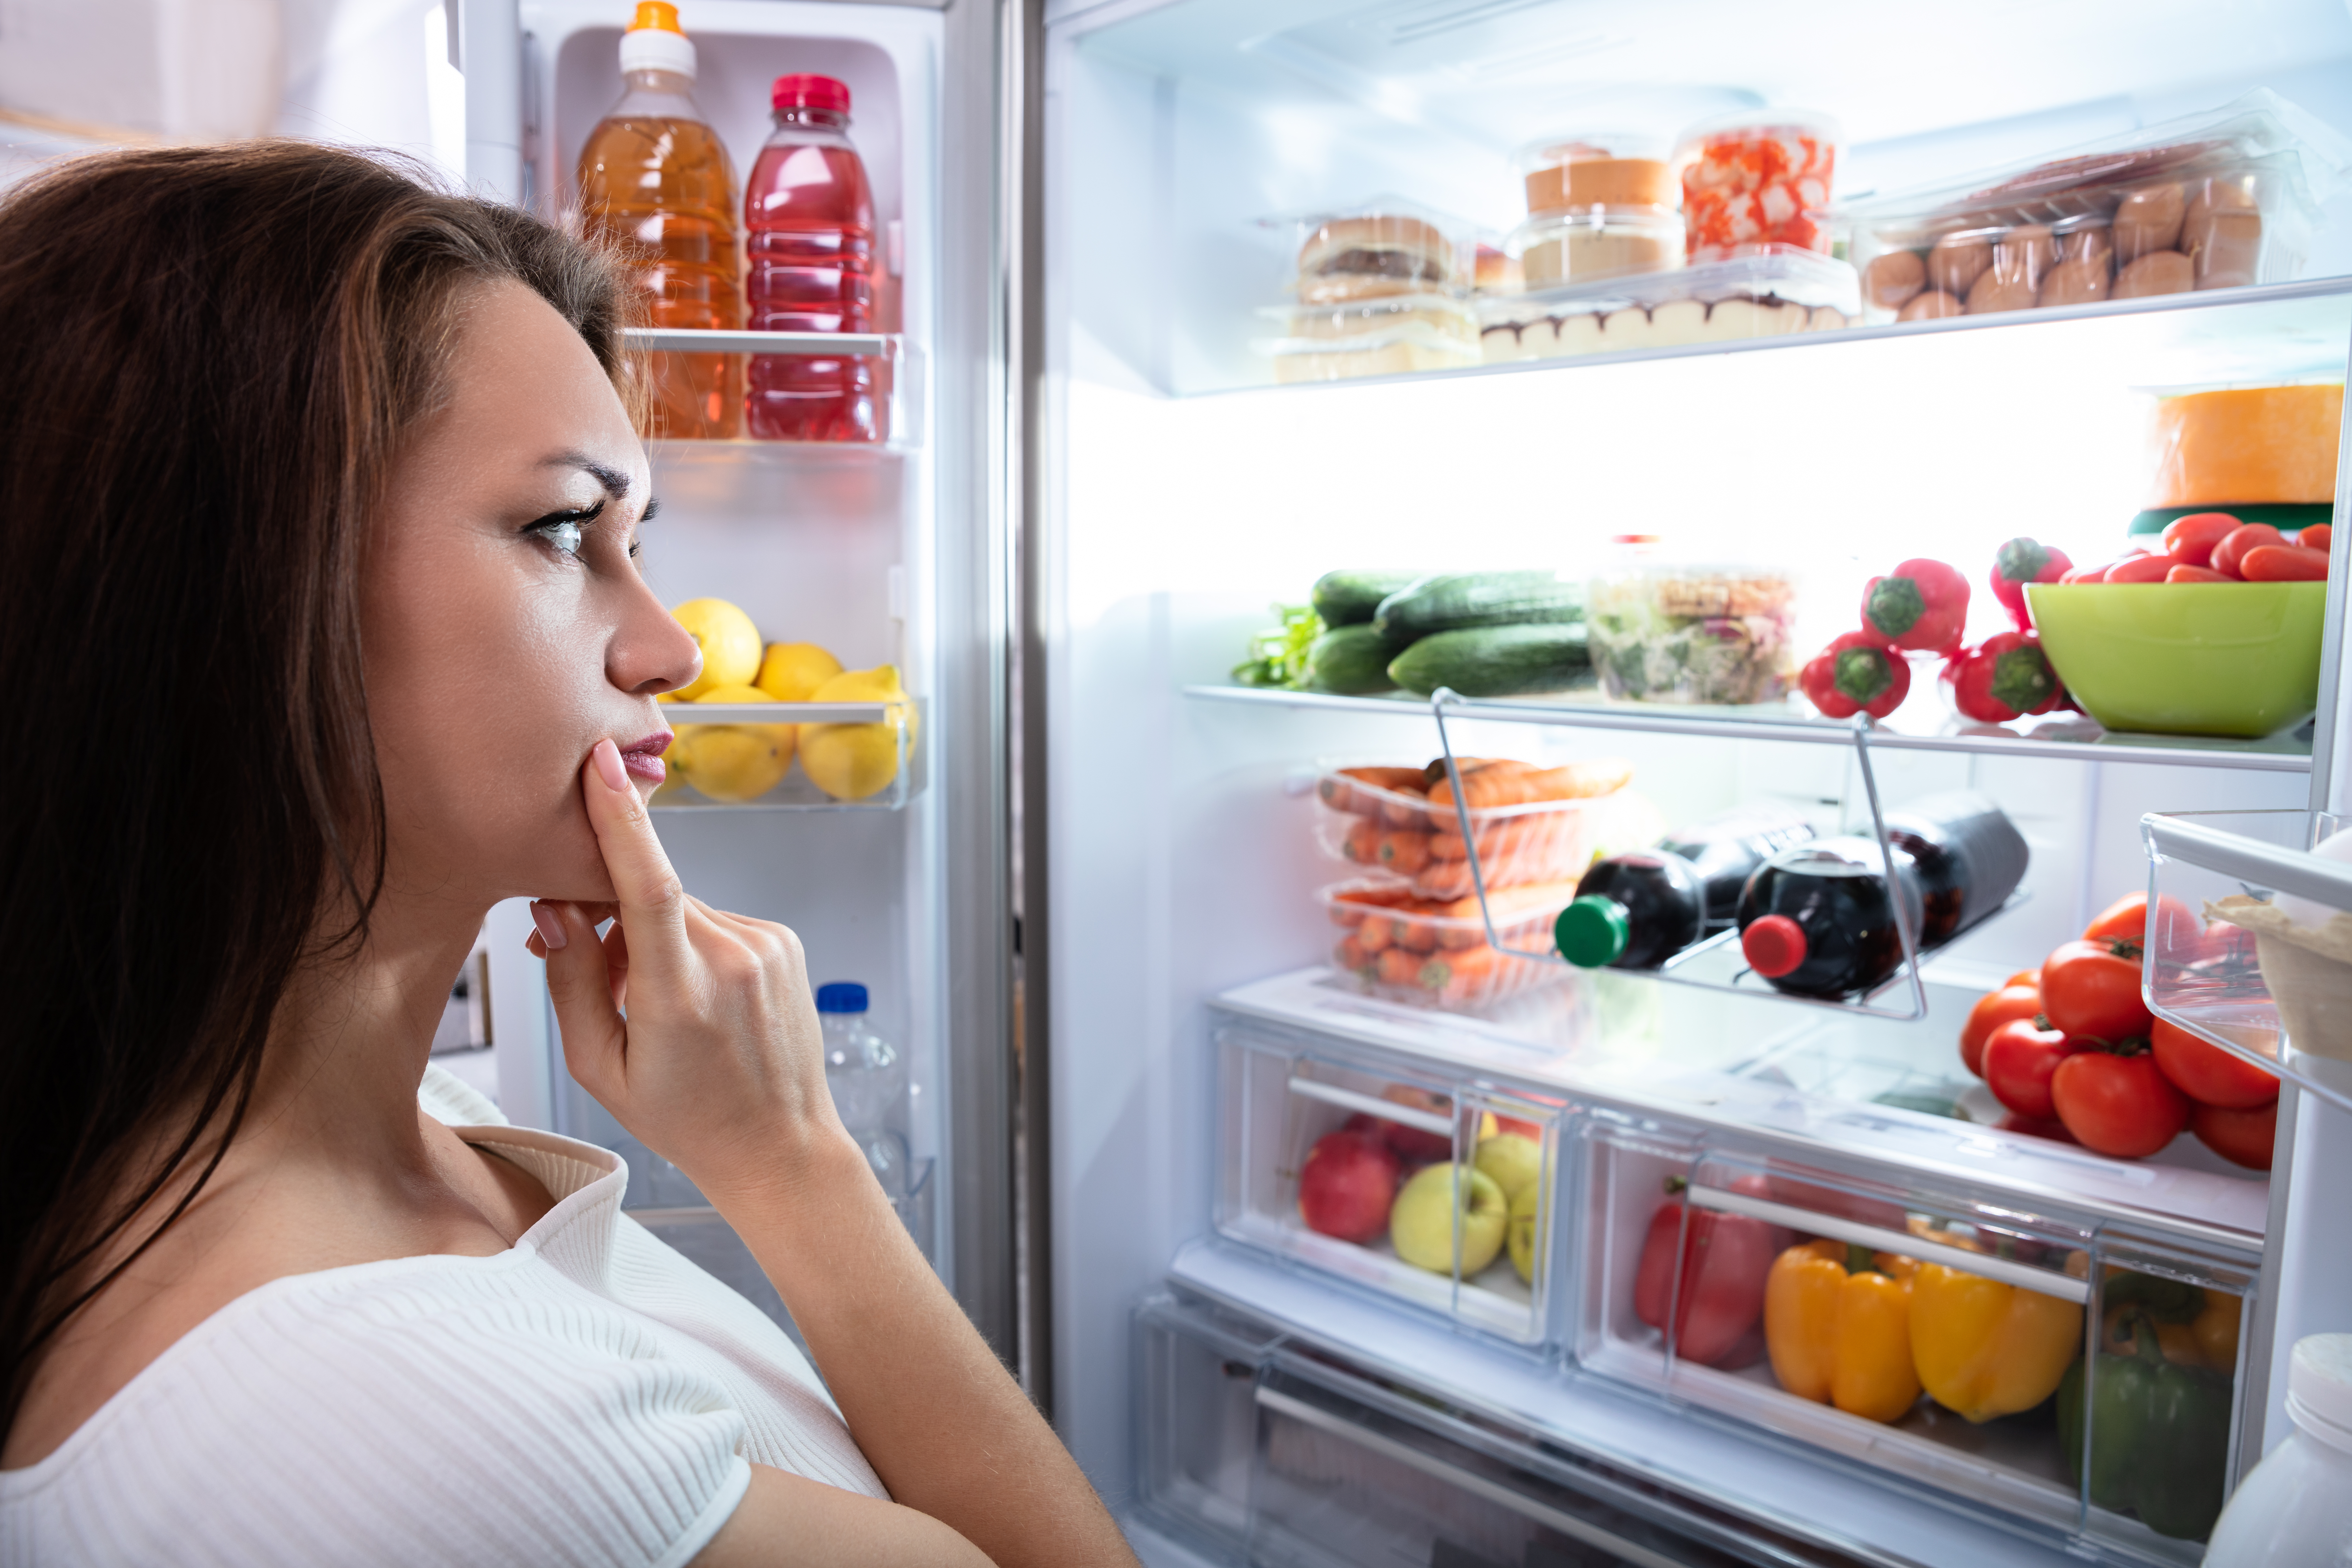 puzzled woman in front of refrigerator